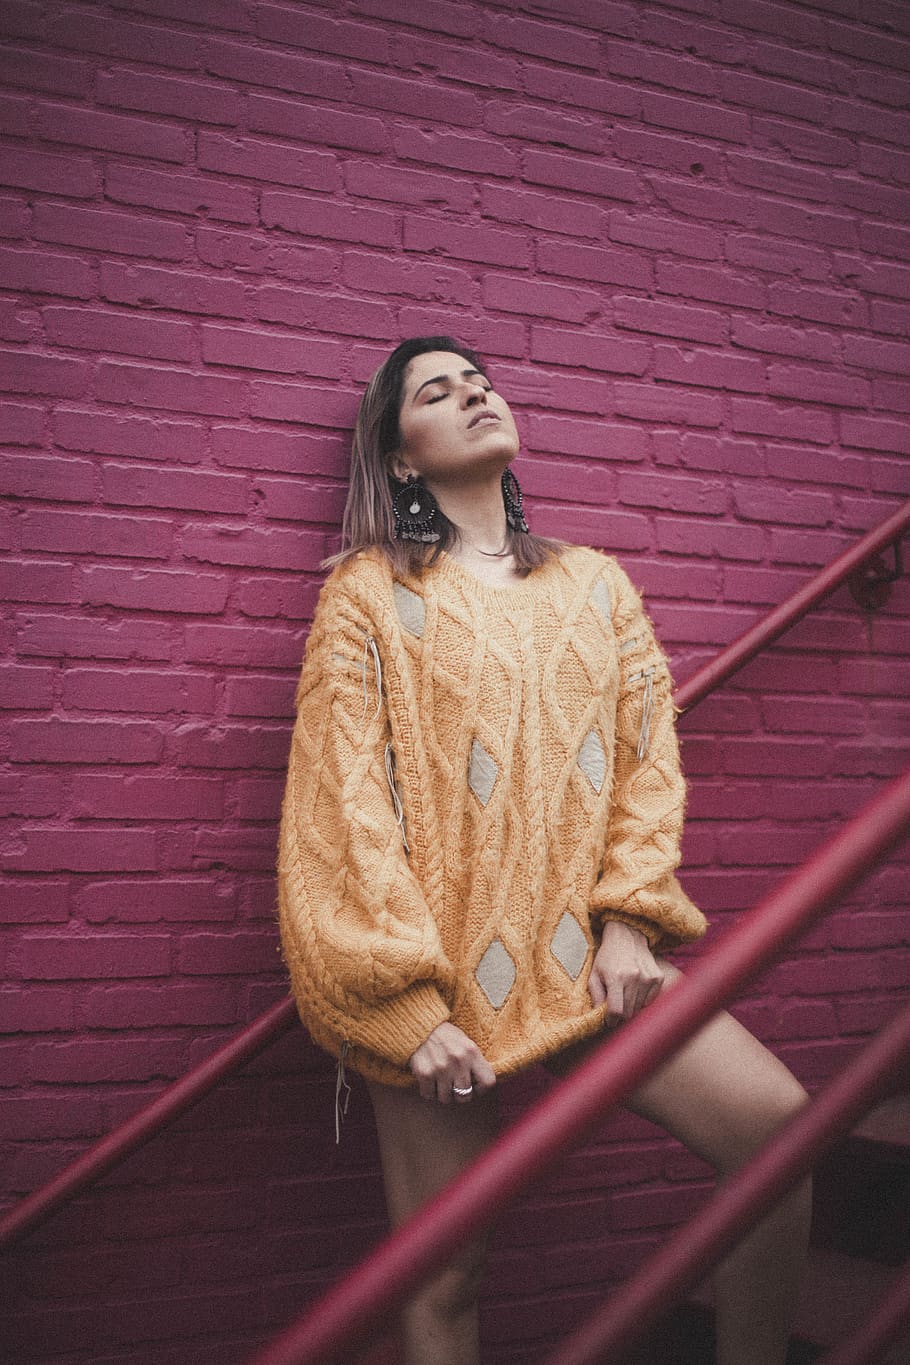 Woman Wearing Orange Sweater Leaning on the Wall, attractive